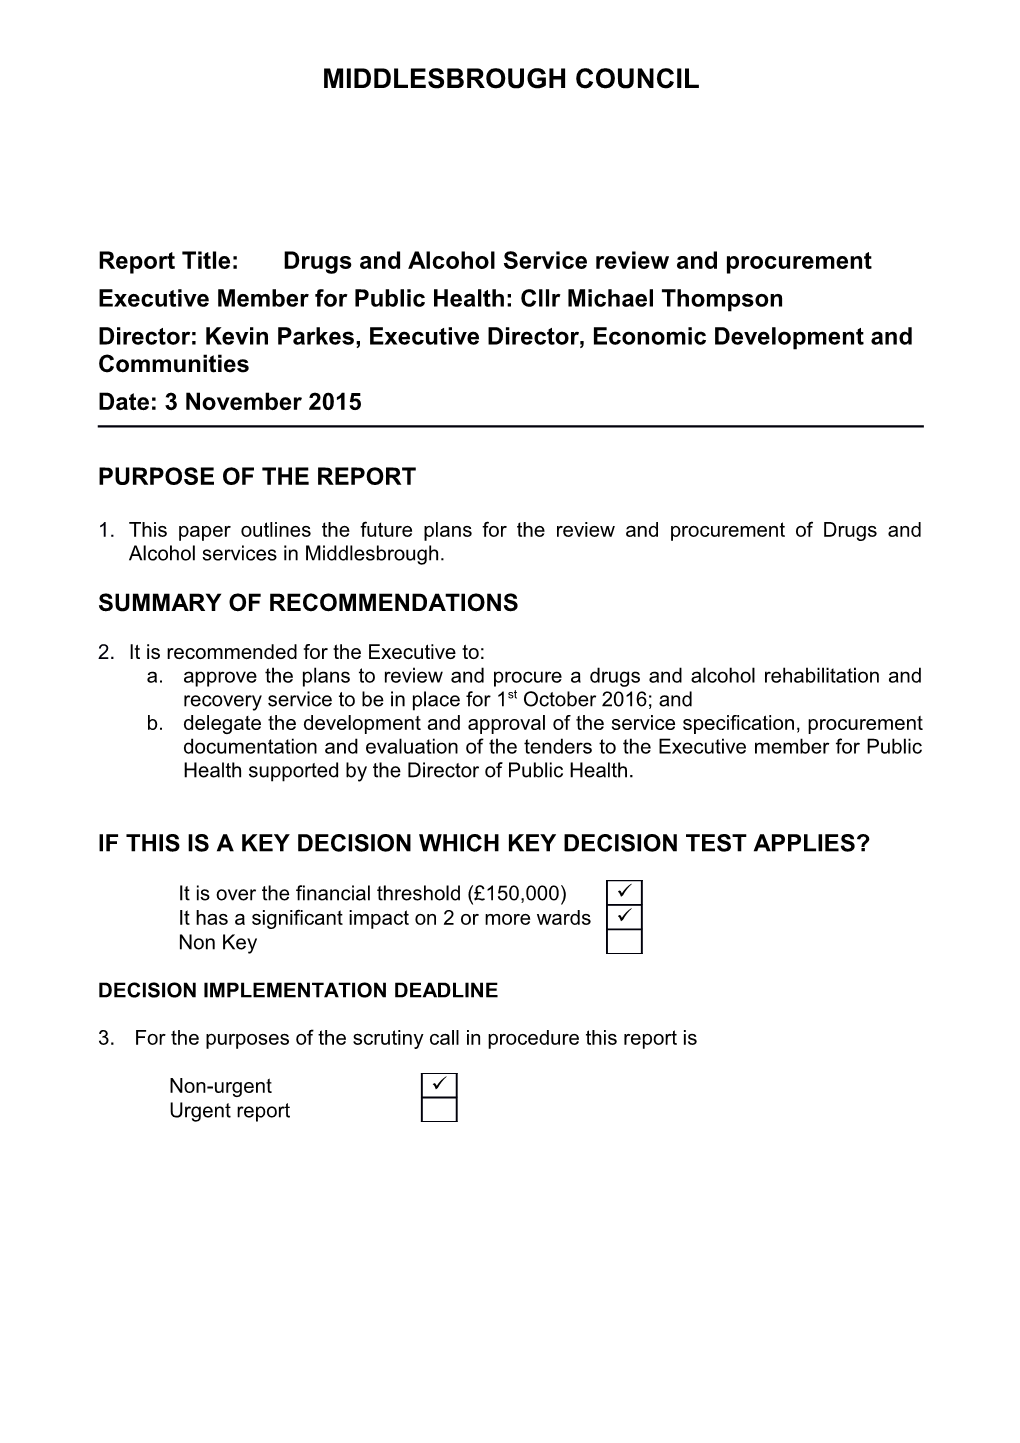 Report Title:Drugs and Alcohol Service Review and Procurement